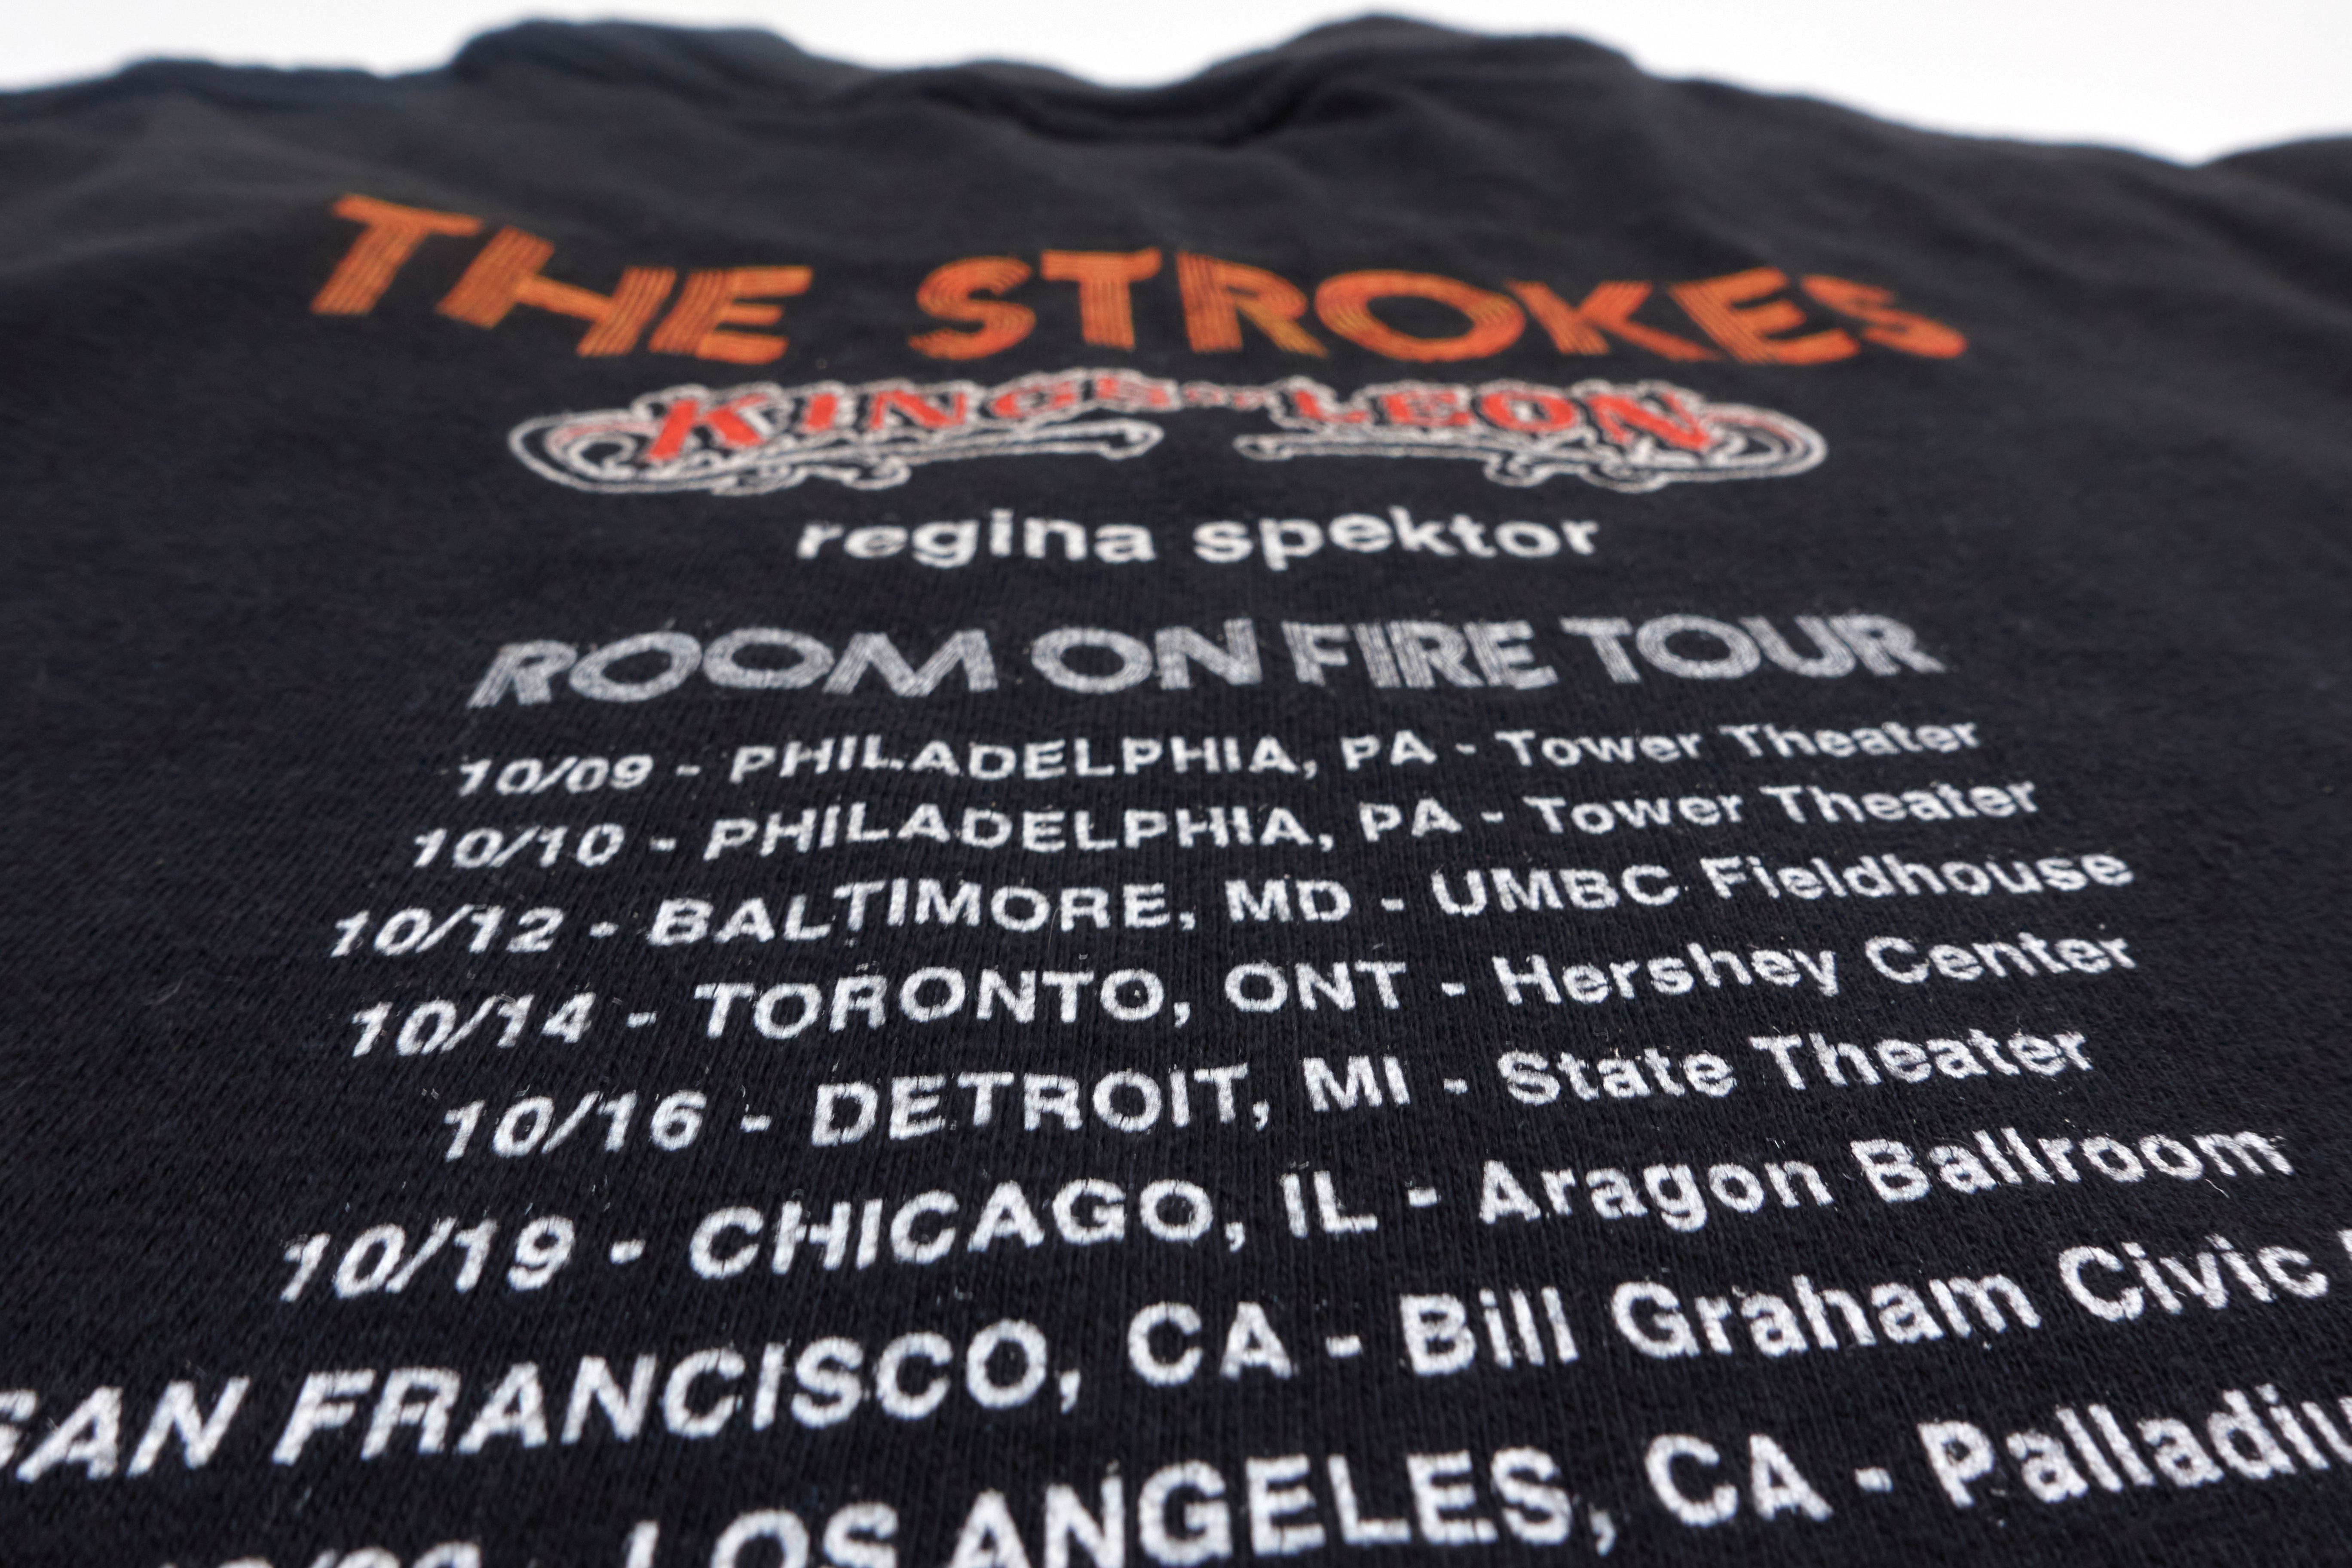 the Strokes - Room On Fire 2003 US Tour with Kings Of Leon and Regina Spector Shirt Size Small